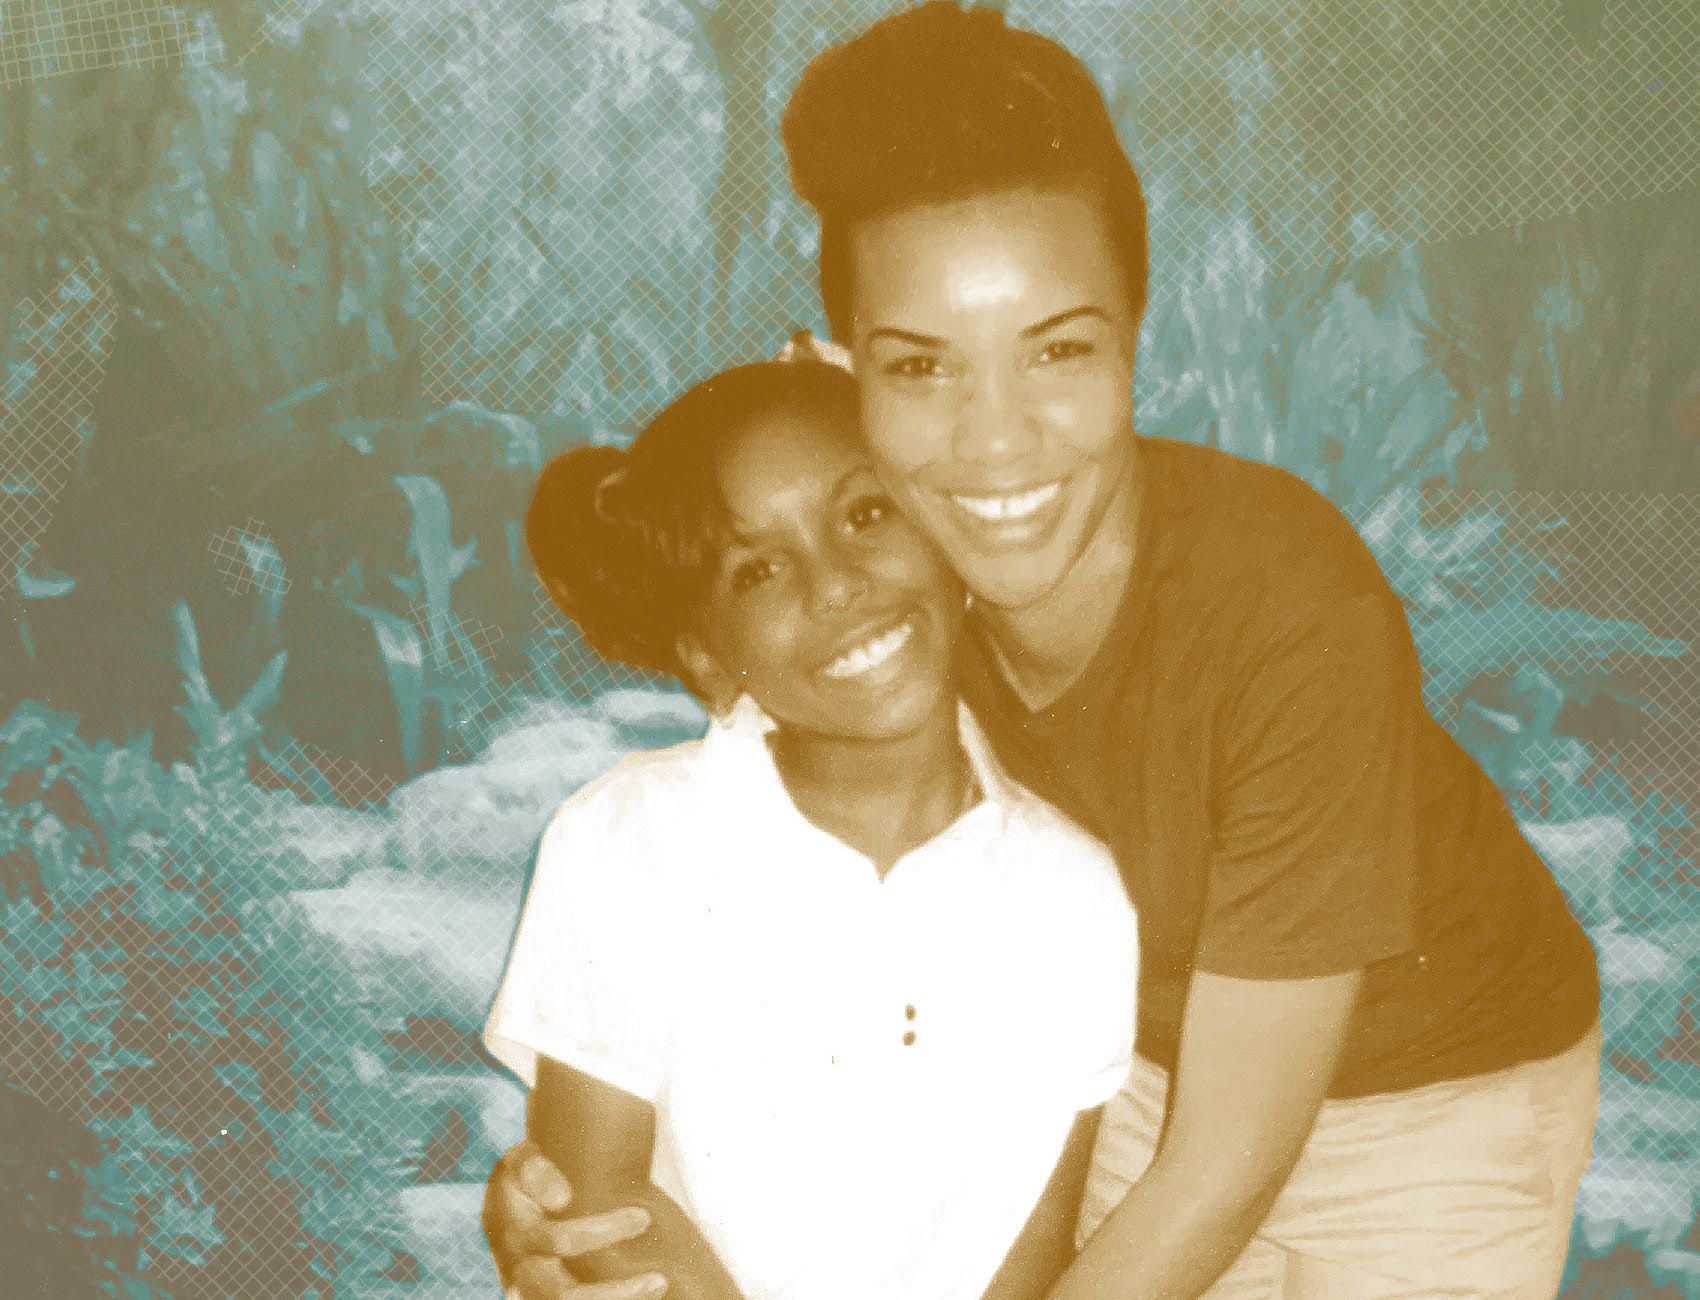 Tanisha and Hon'Esty during their first prison visit at the Women's Huron Valley Correctional Facility in Ypsilanti, Michigan in 2012. United States, 2012.